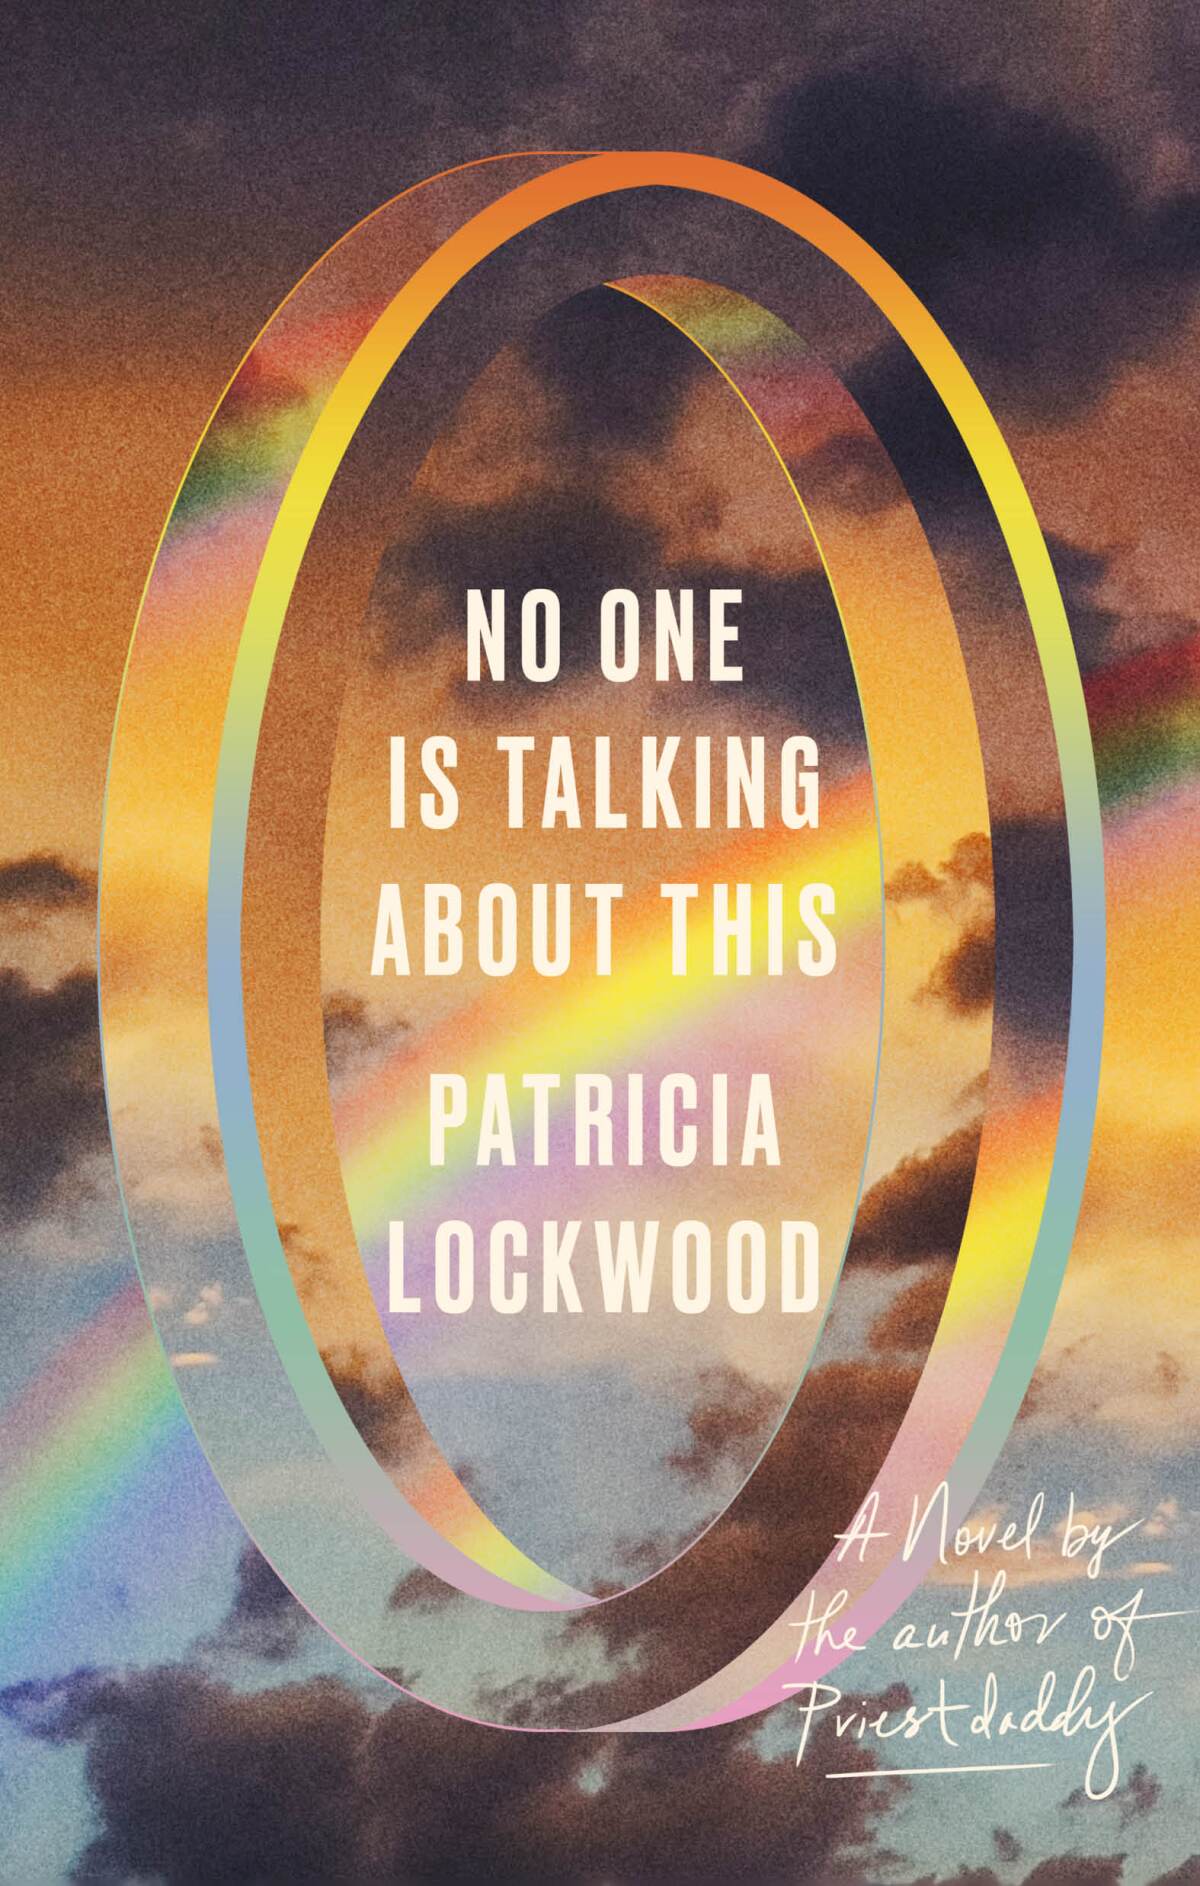 "No One is Talking About This," by Patricia Lockwood